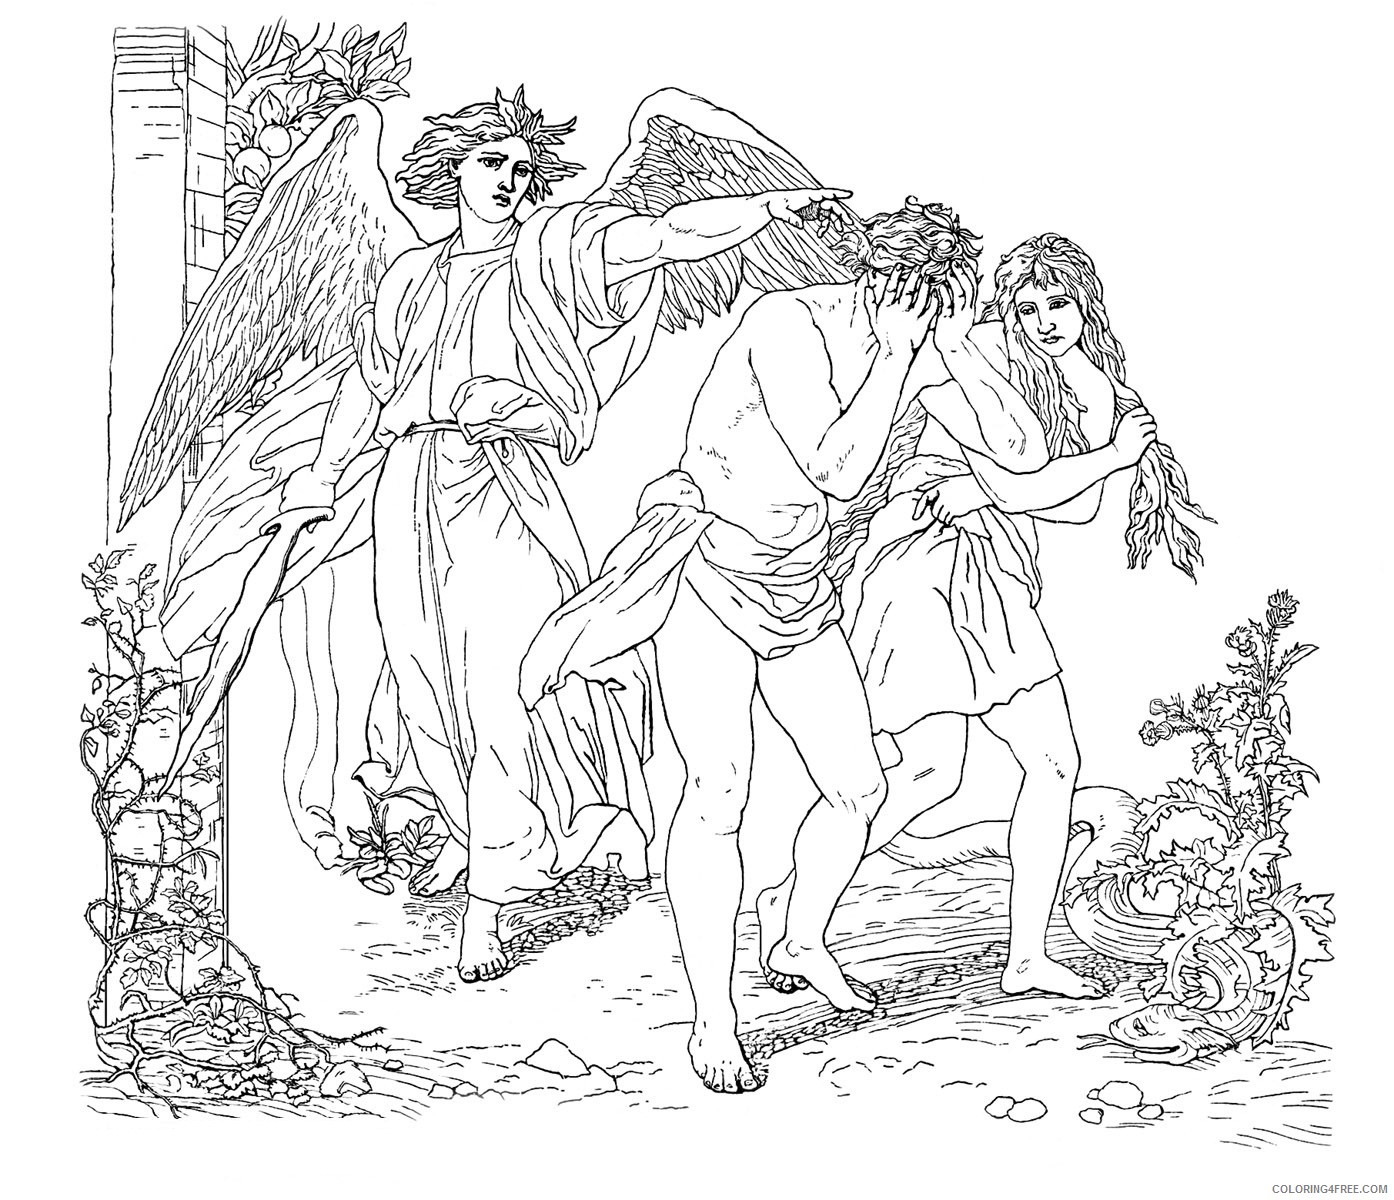 adam and eve coloring pages expelled from eden Coloring4free